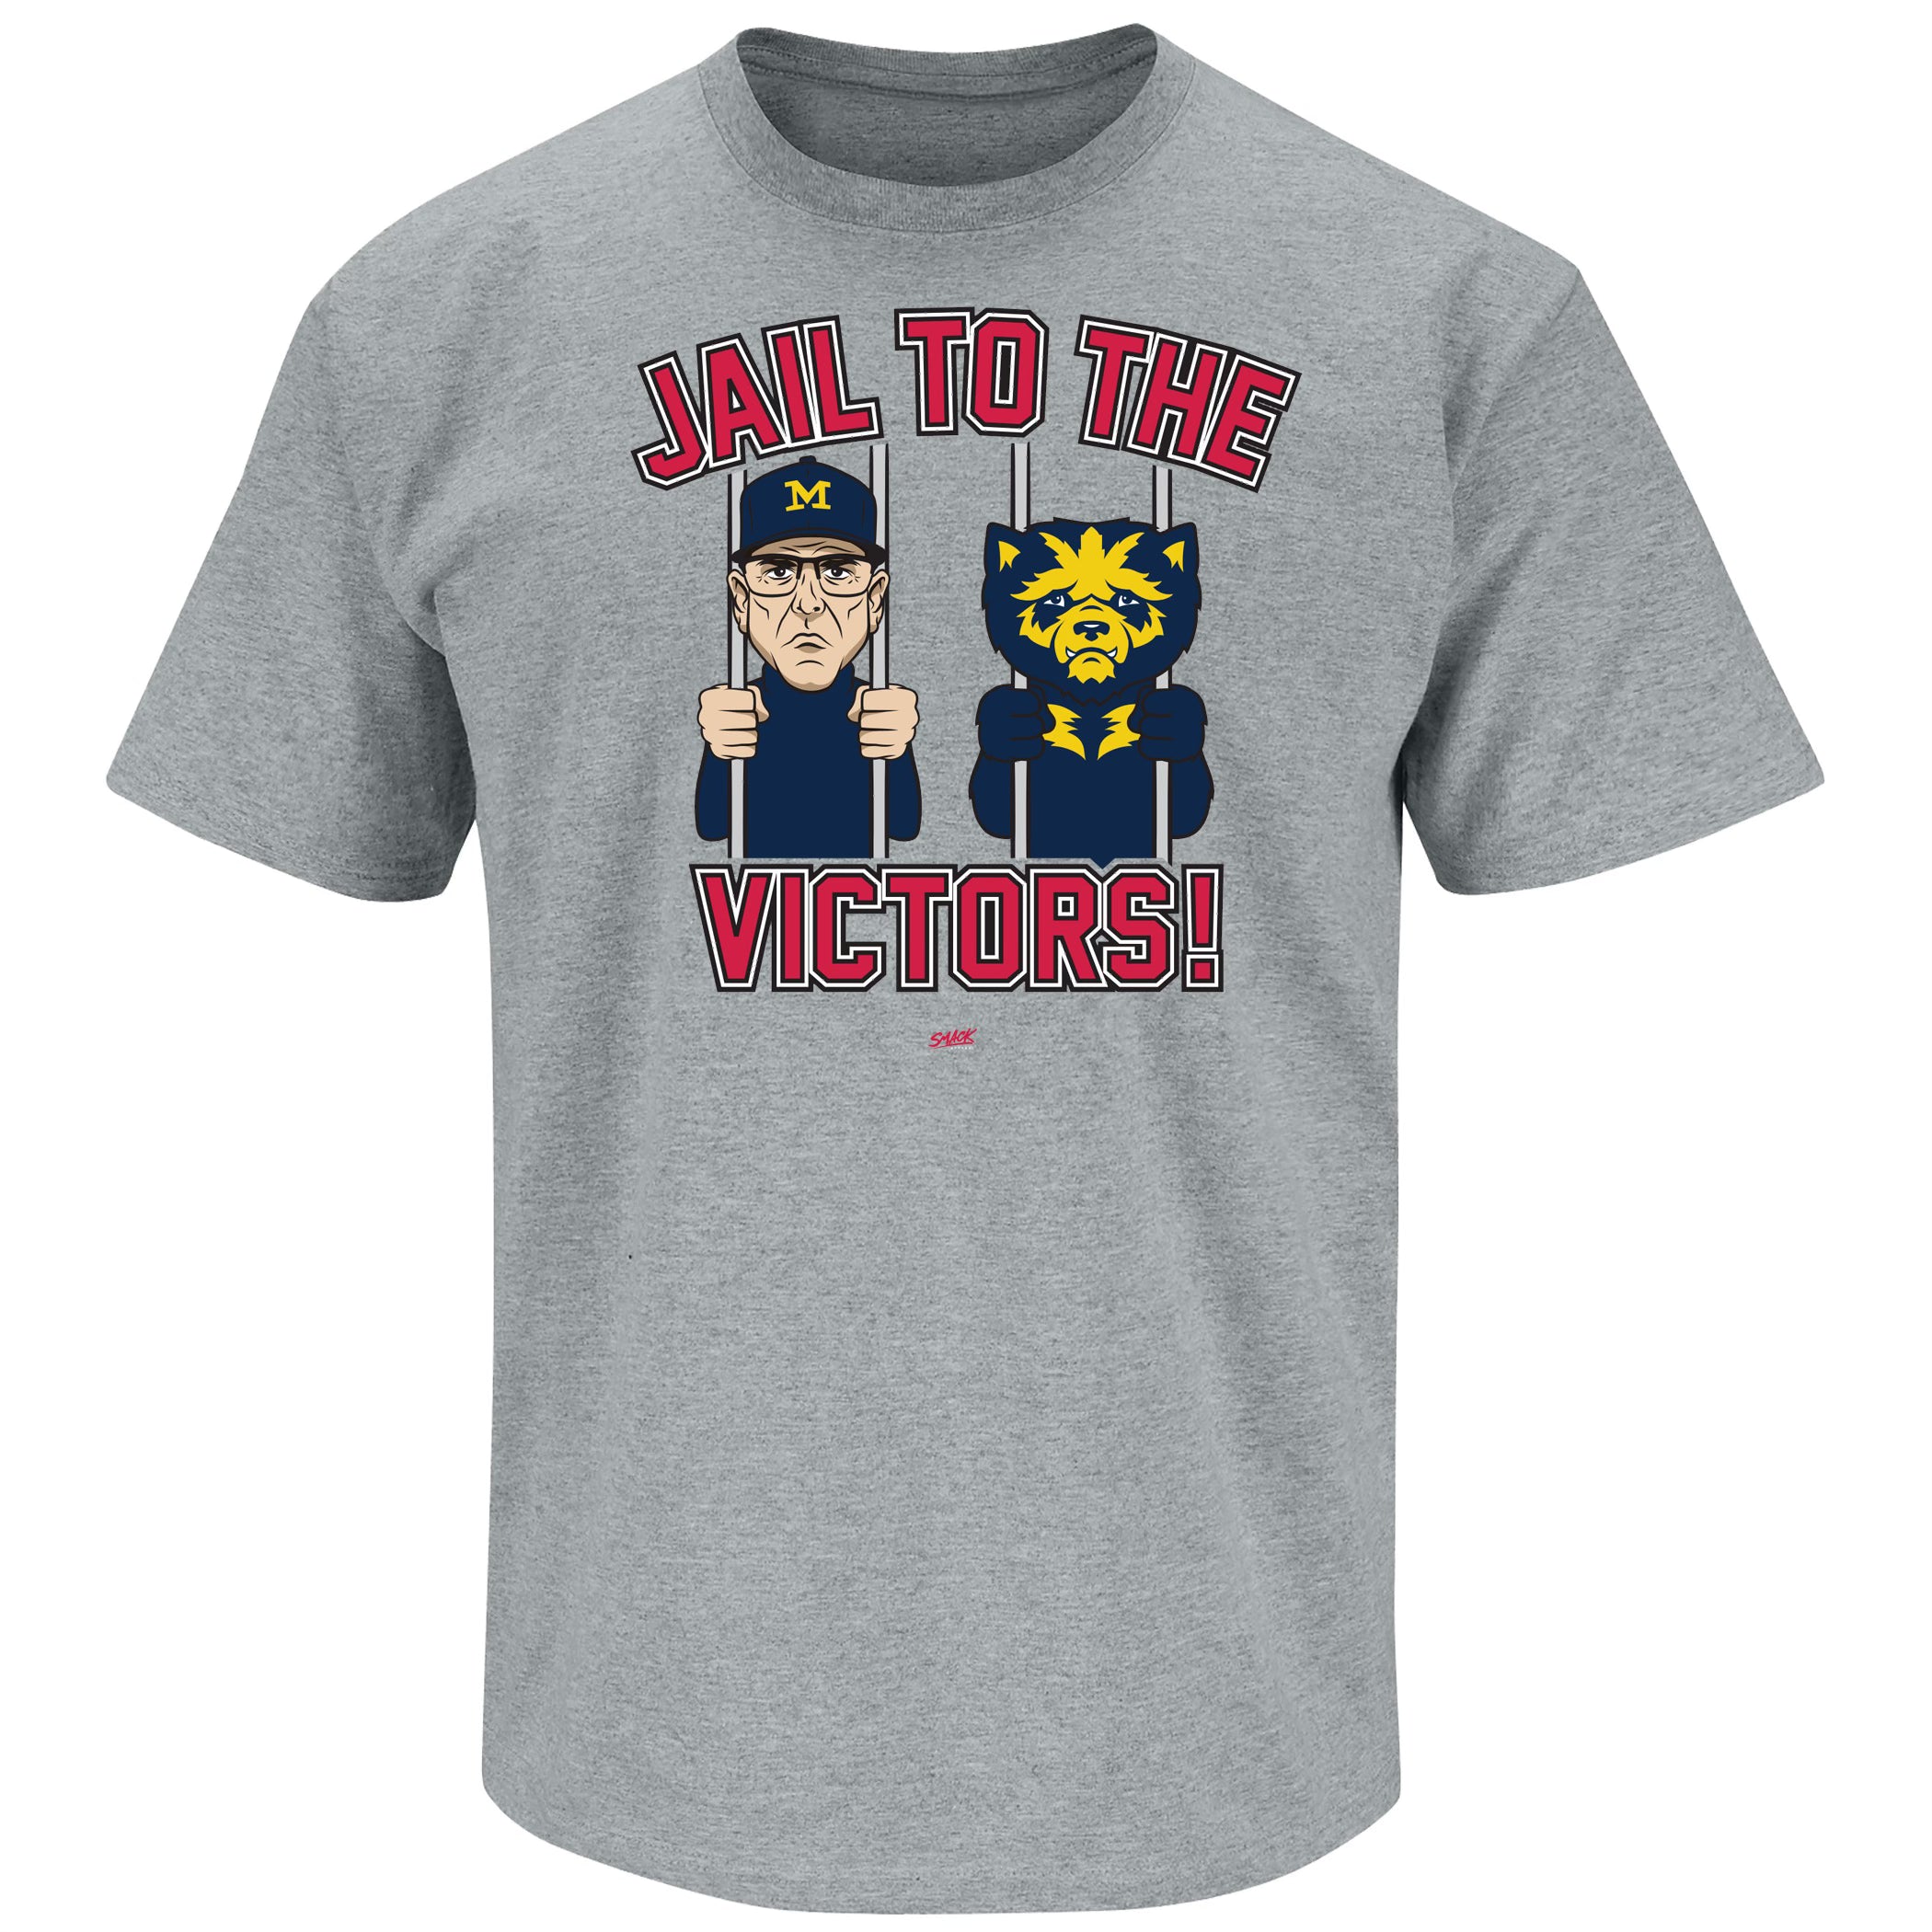 JAIL TO THE VICTORS T-Shirt